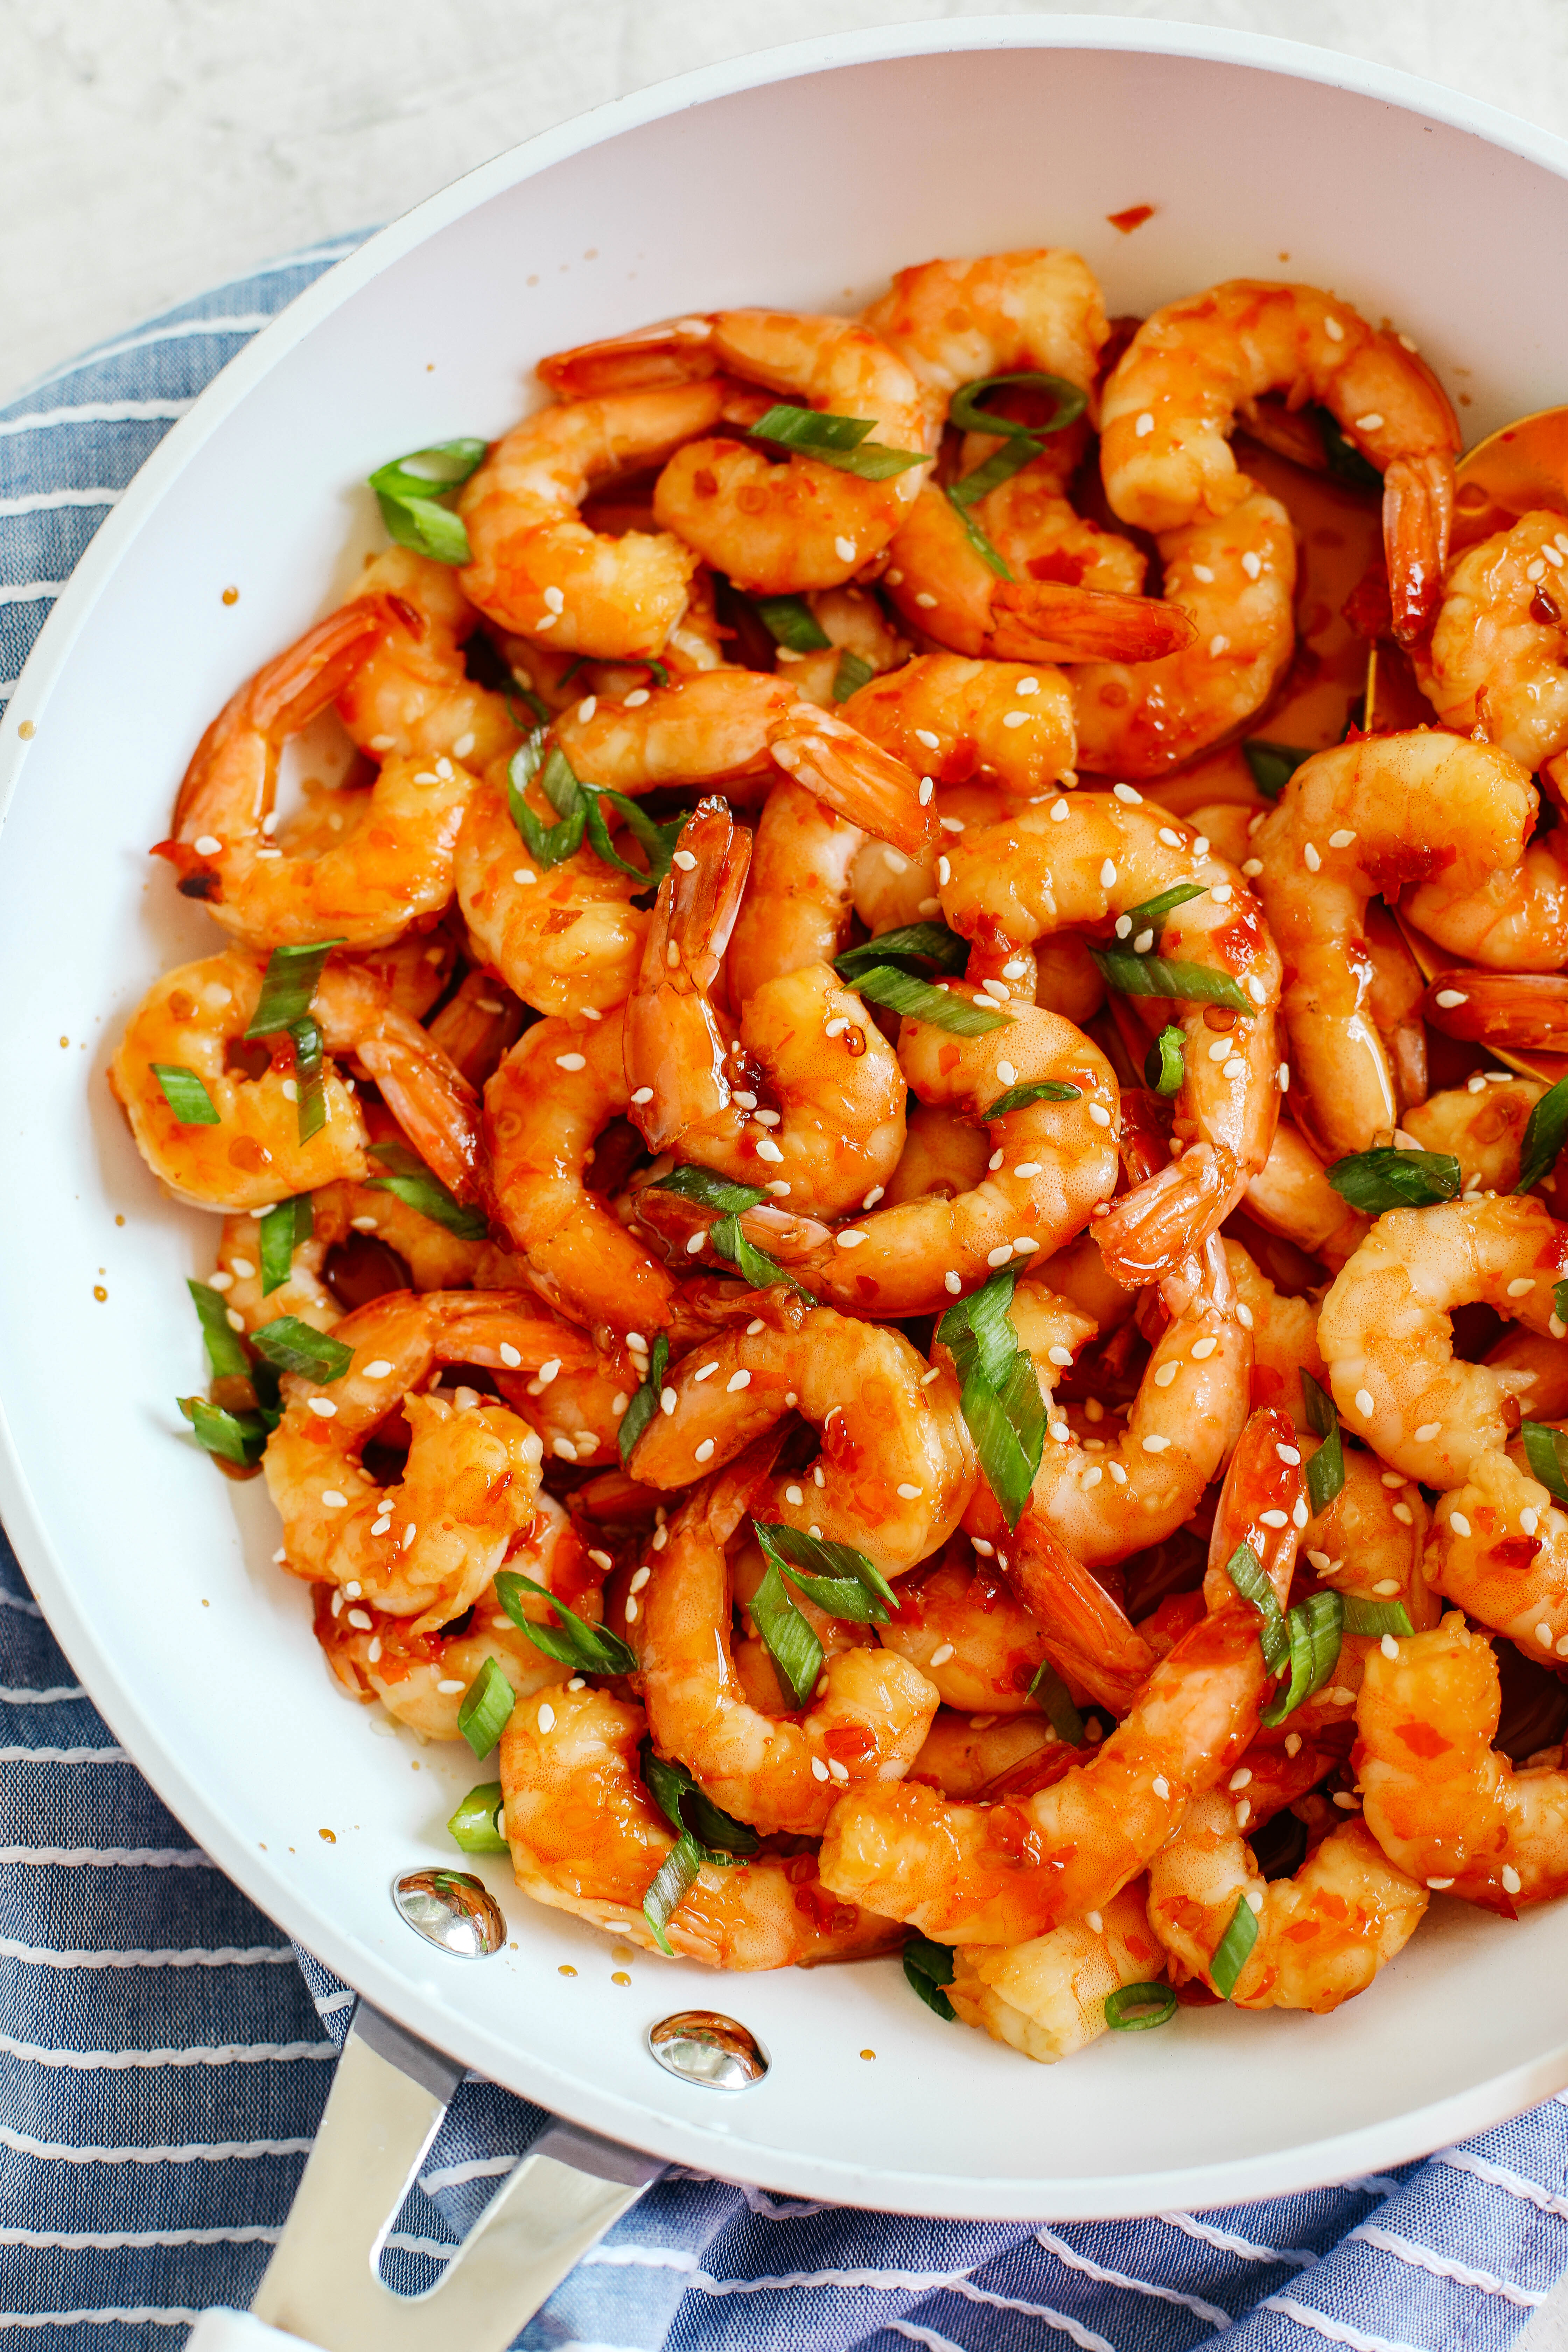 Sweet and flavorful Skillet Chili Garlic and Lime Shrimp that tastes amazing and is ready in just minutes!  Perfect as an appetizer, on top of a salad or even as a main dish!